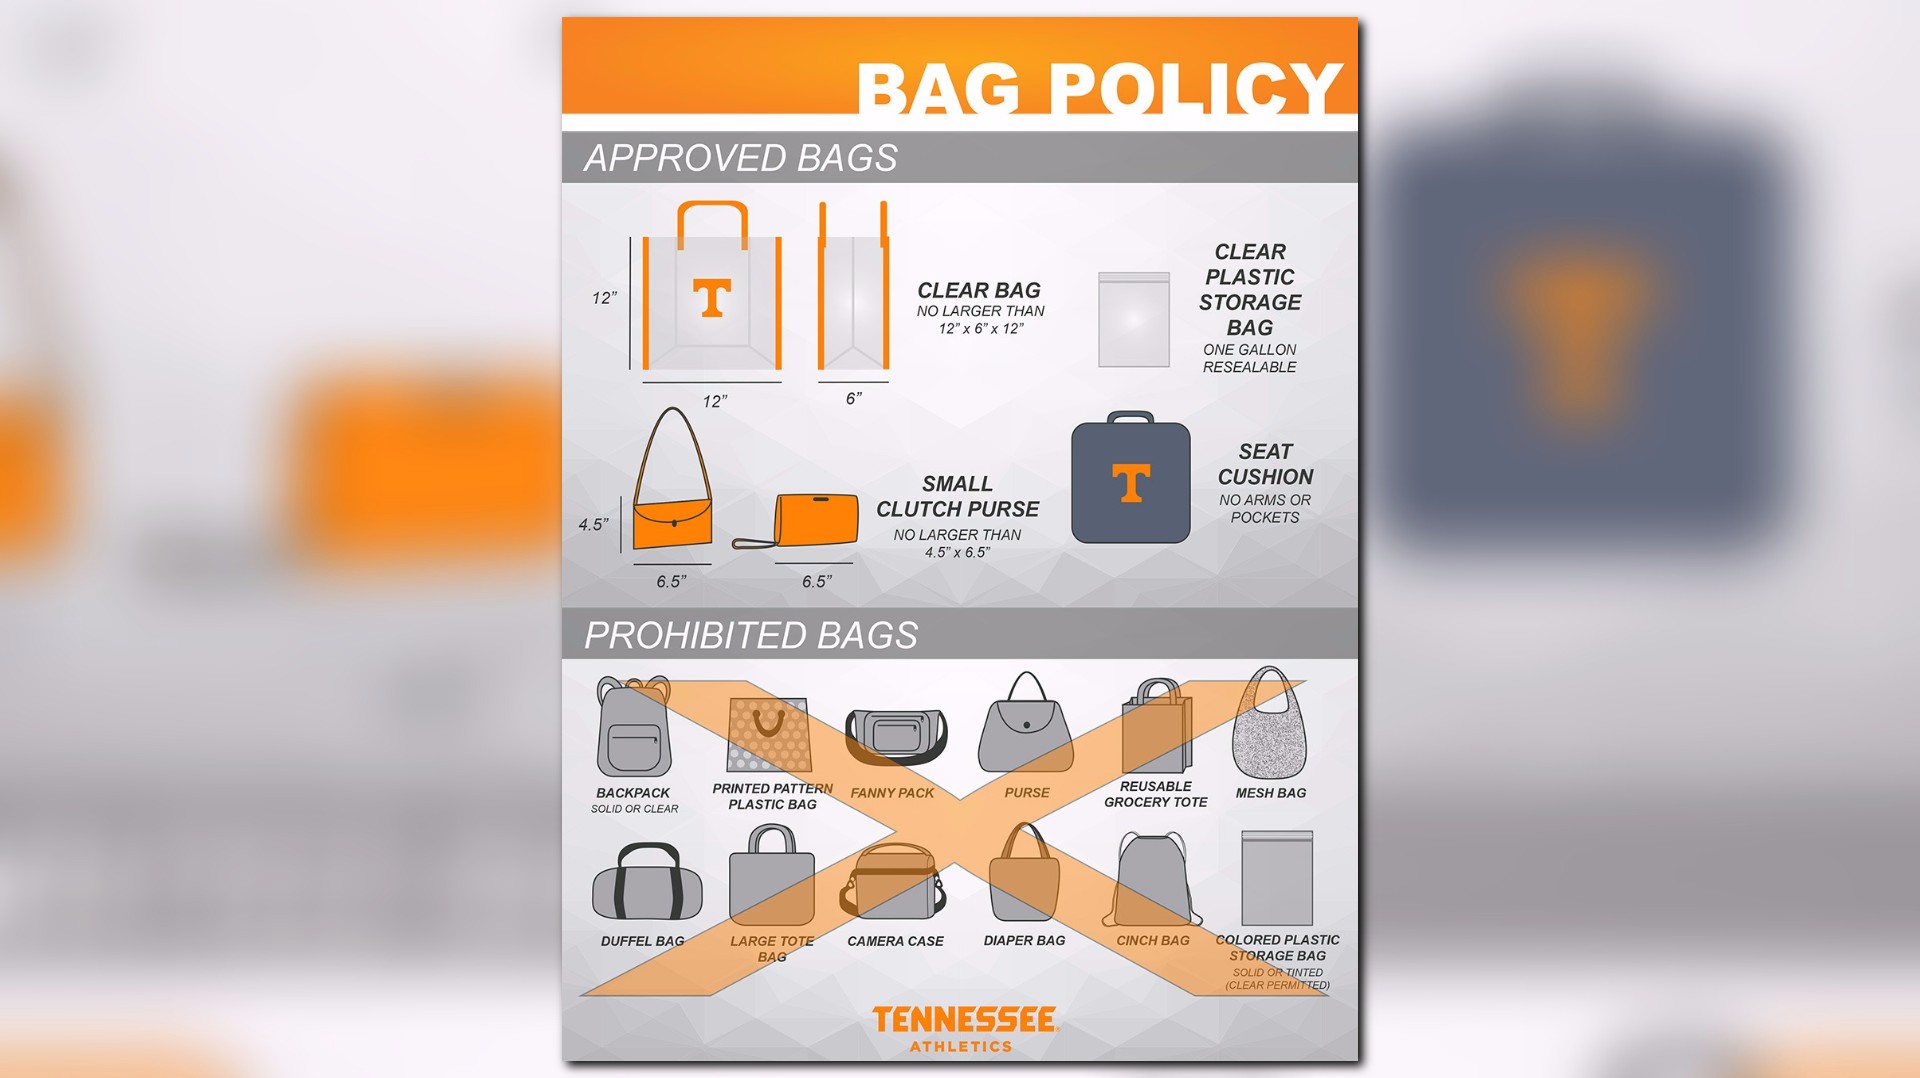 UT implementing new clear bag policy at games | cbs8.com